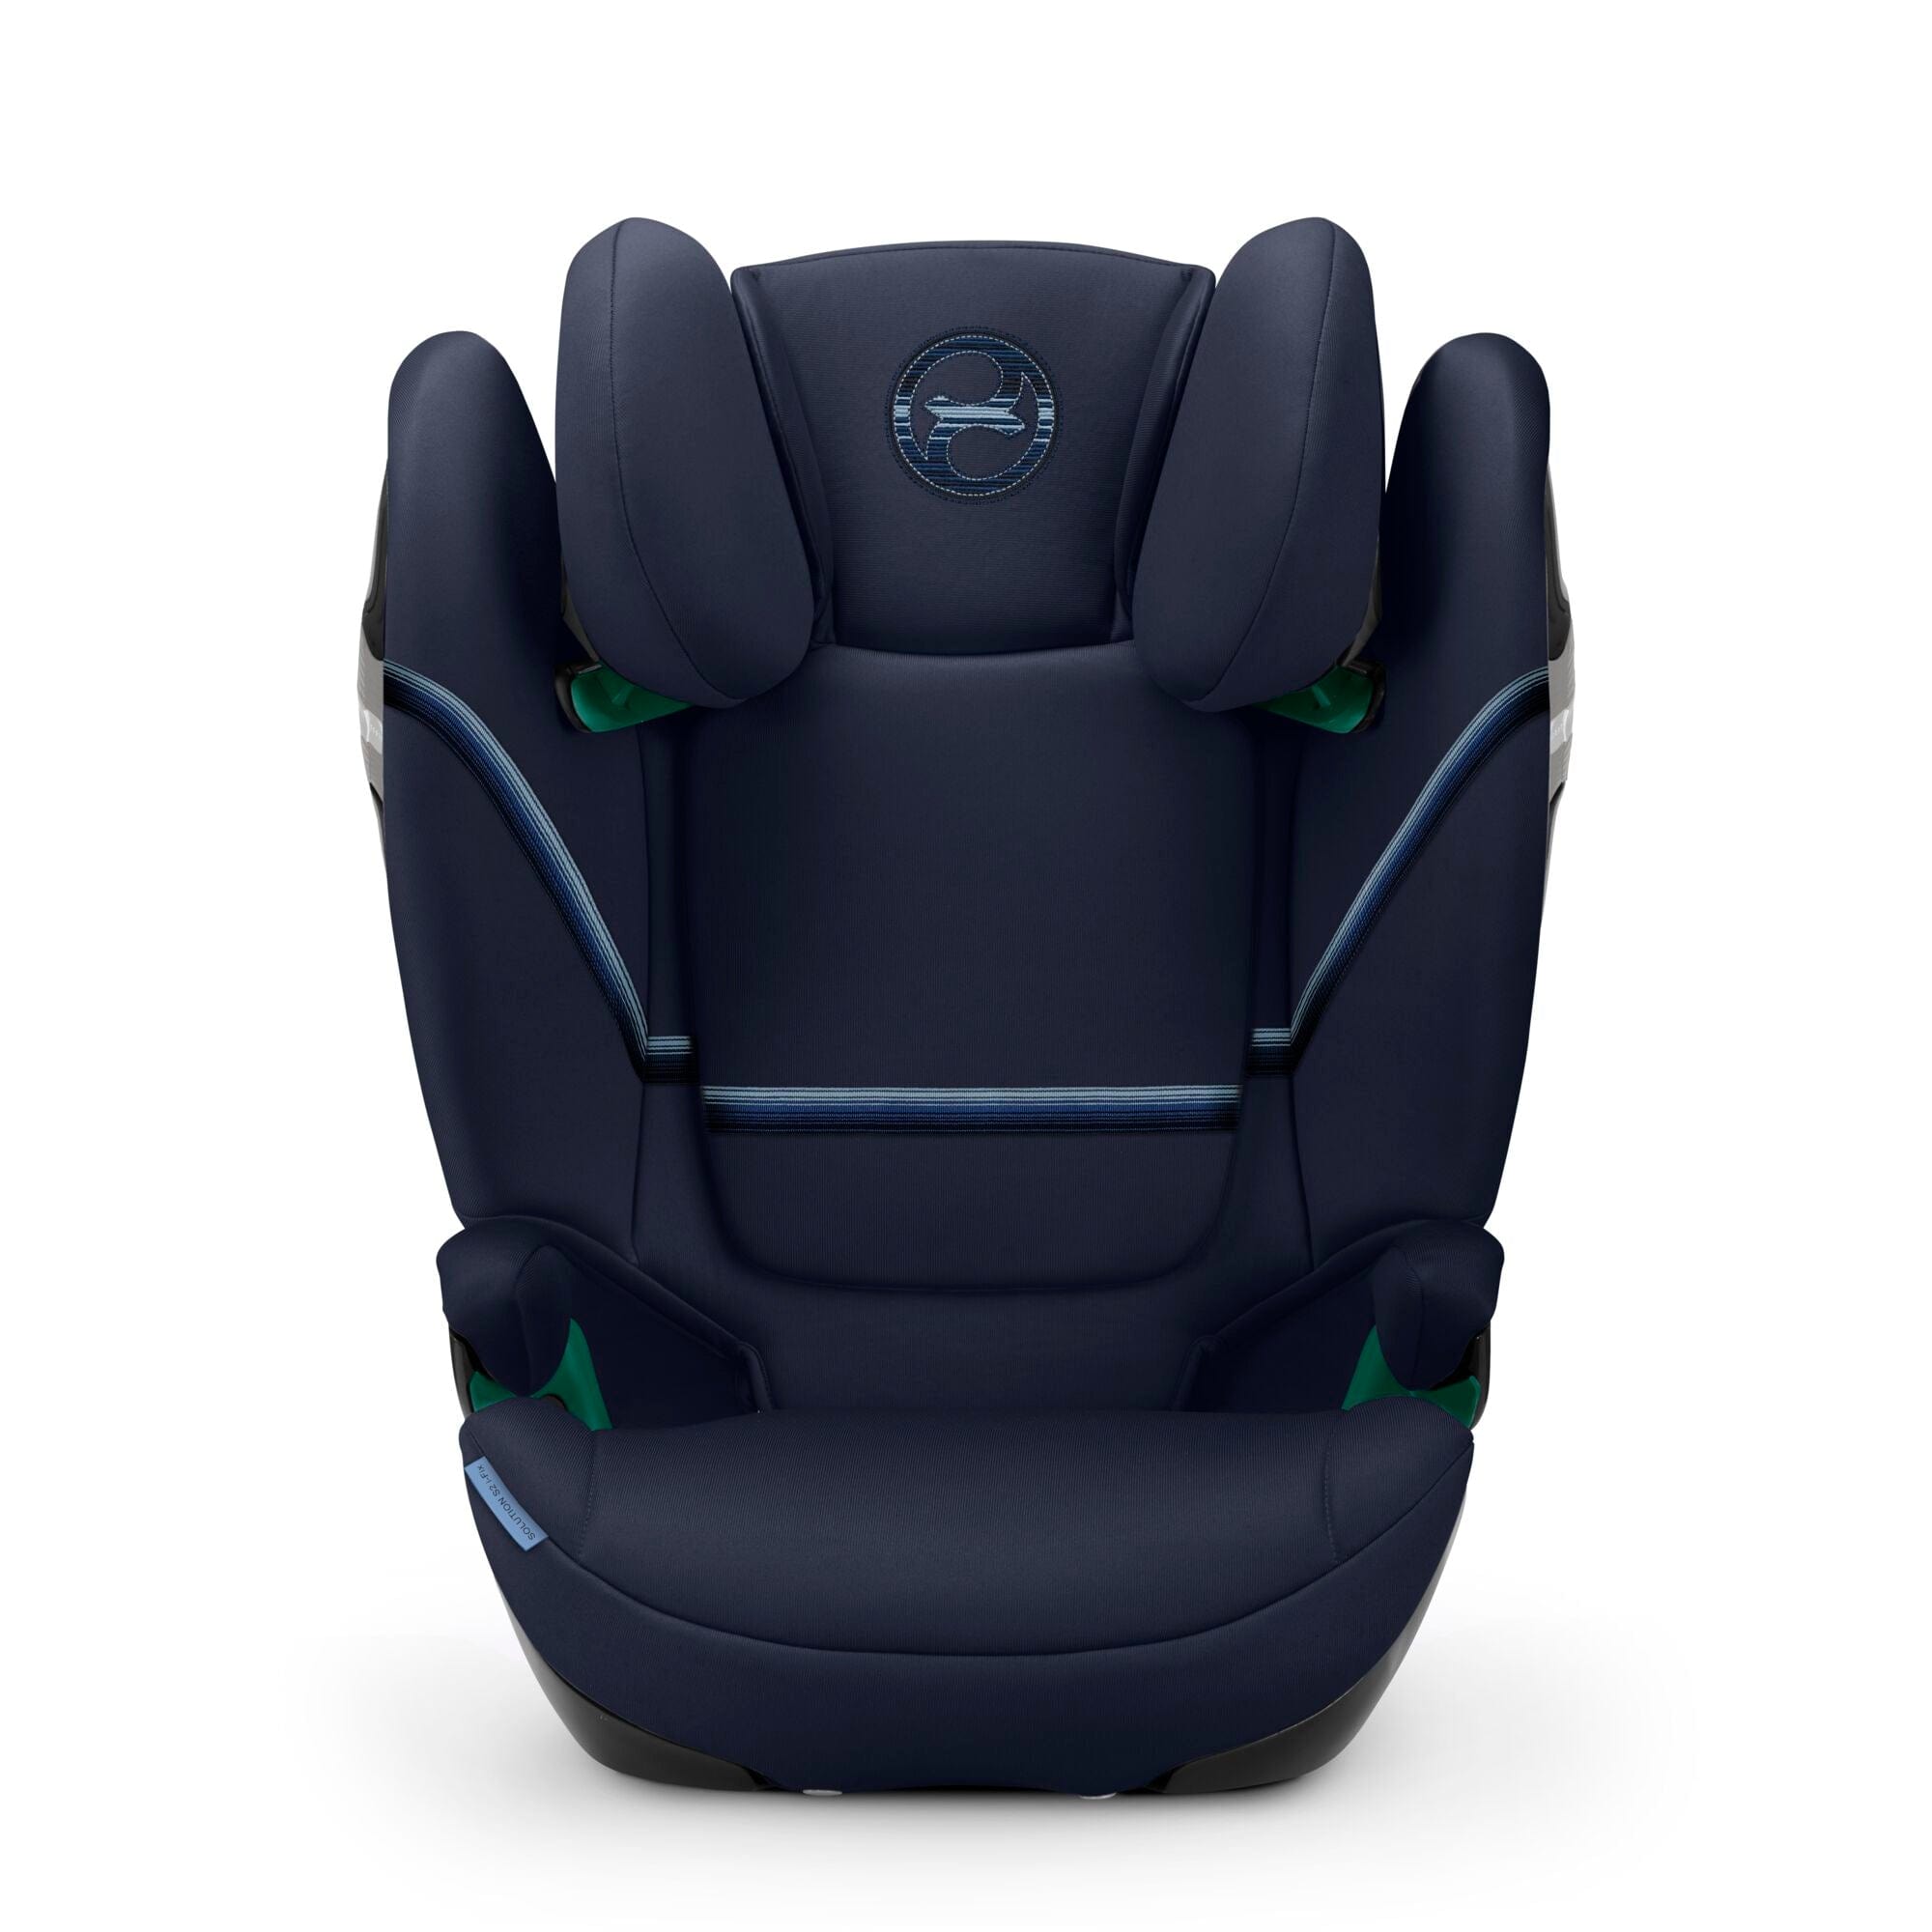 Cybex highback booster seats Cybex Solution S2 i-FIX Highback Booster Seat Ocean Blue 522002266